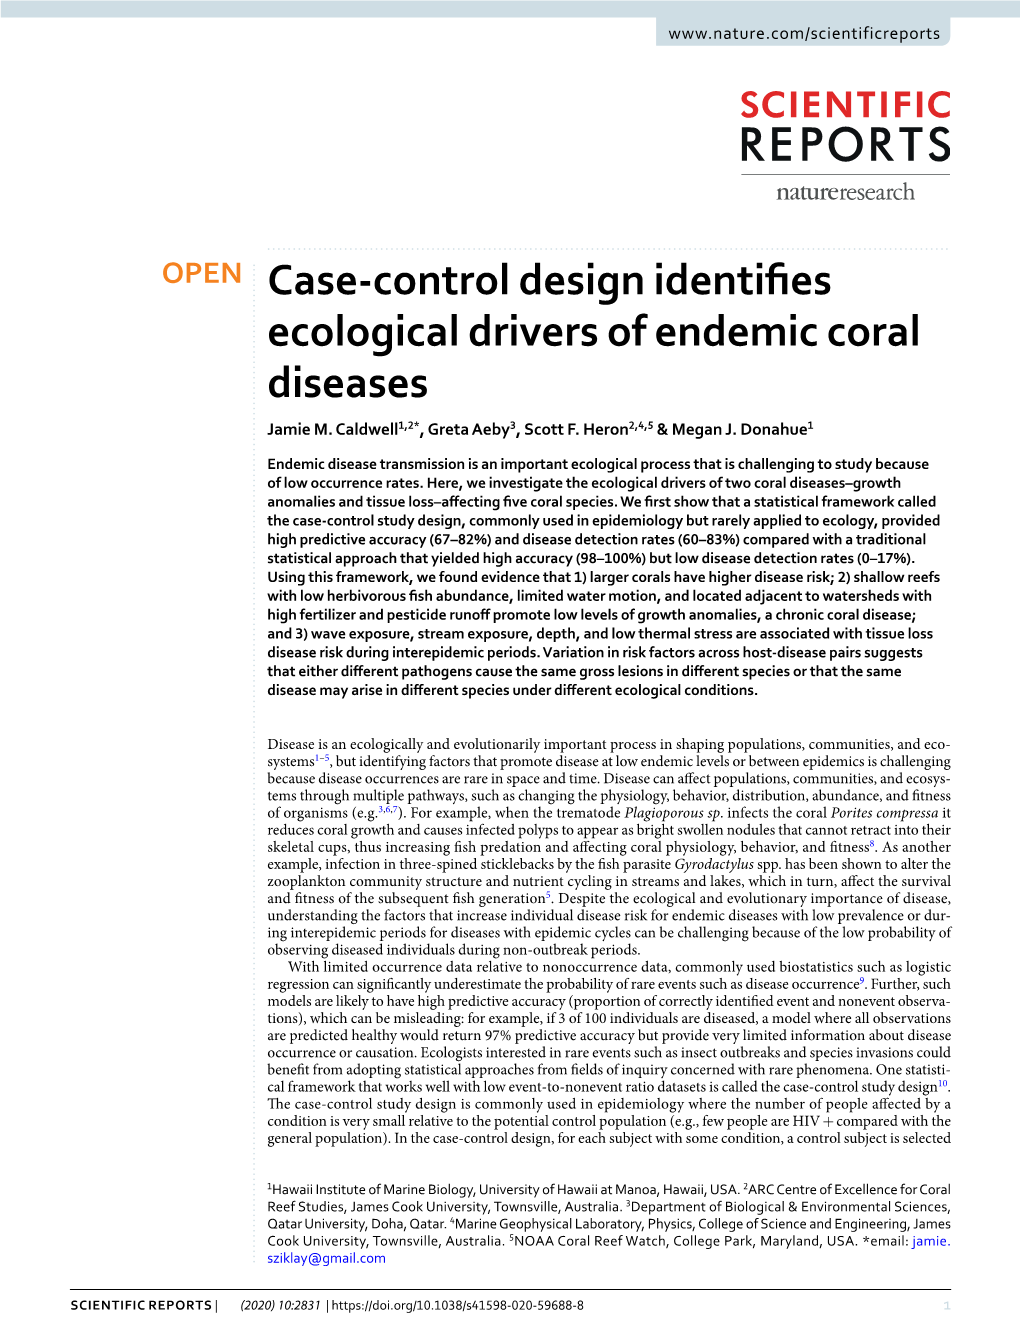 Case-Control Design Identifies Ecological Drivers of Endemic Coral